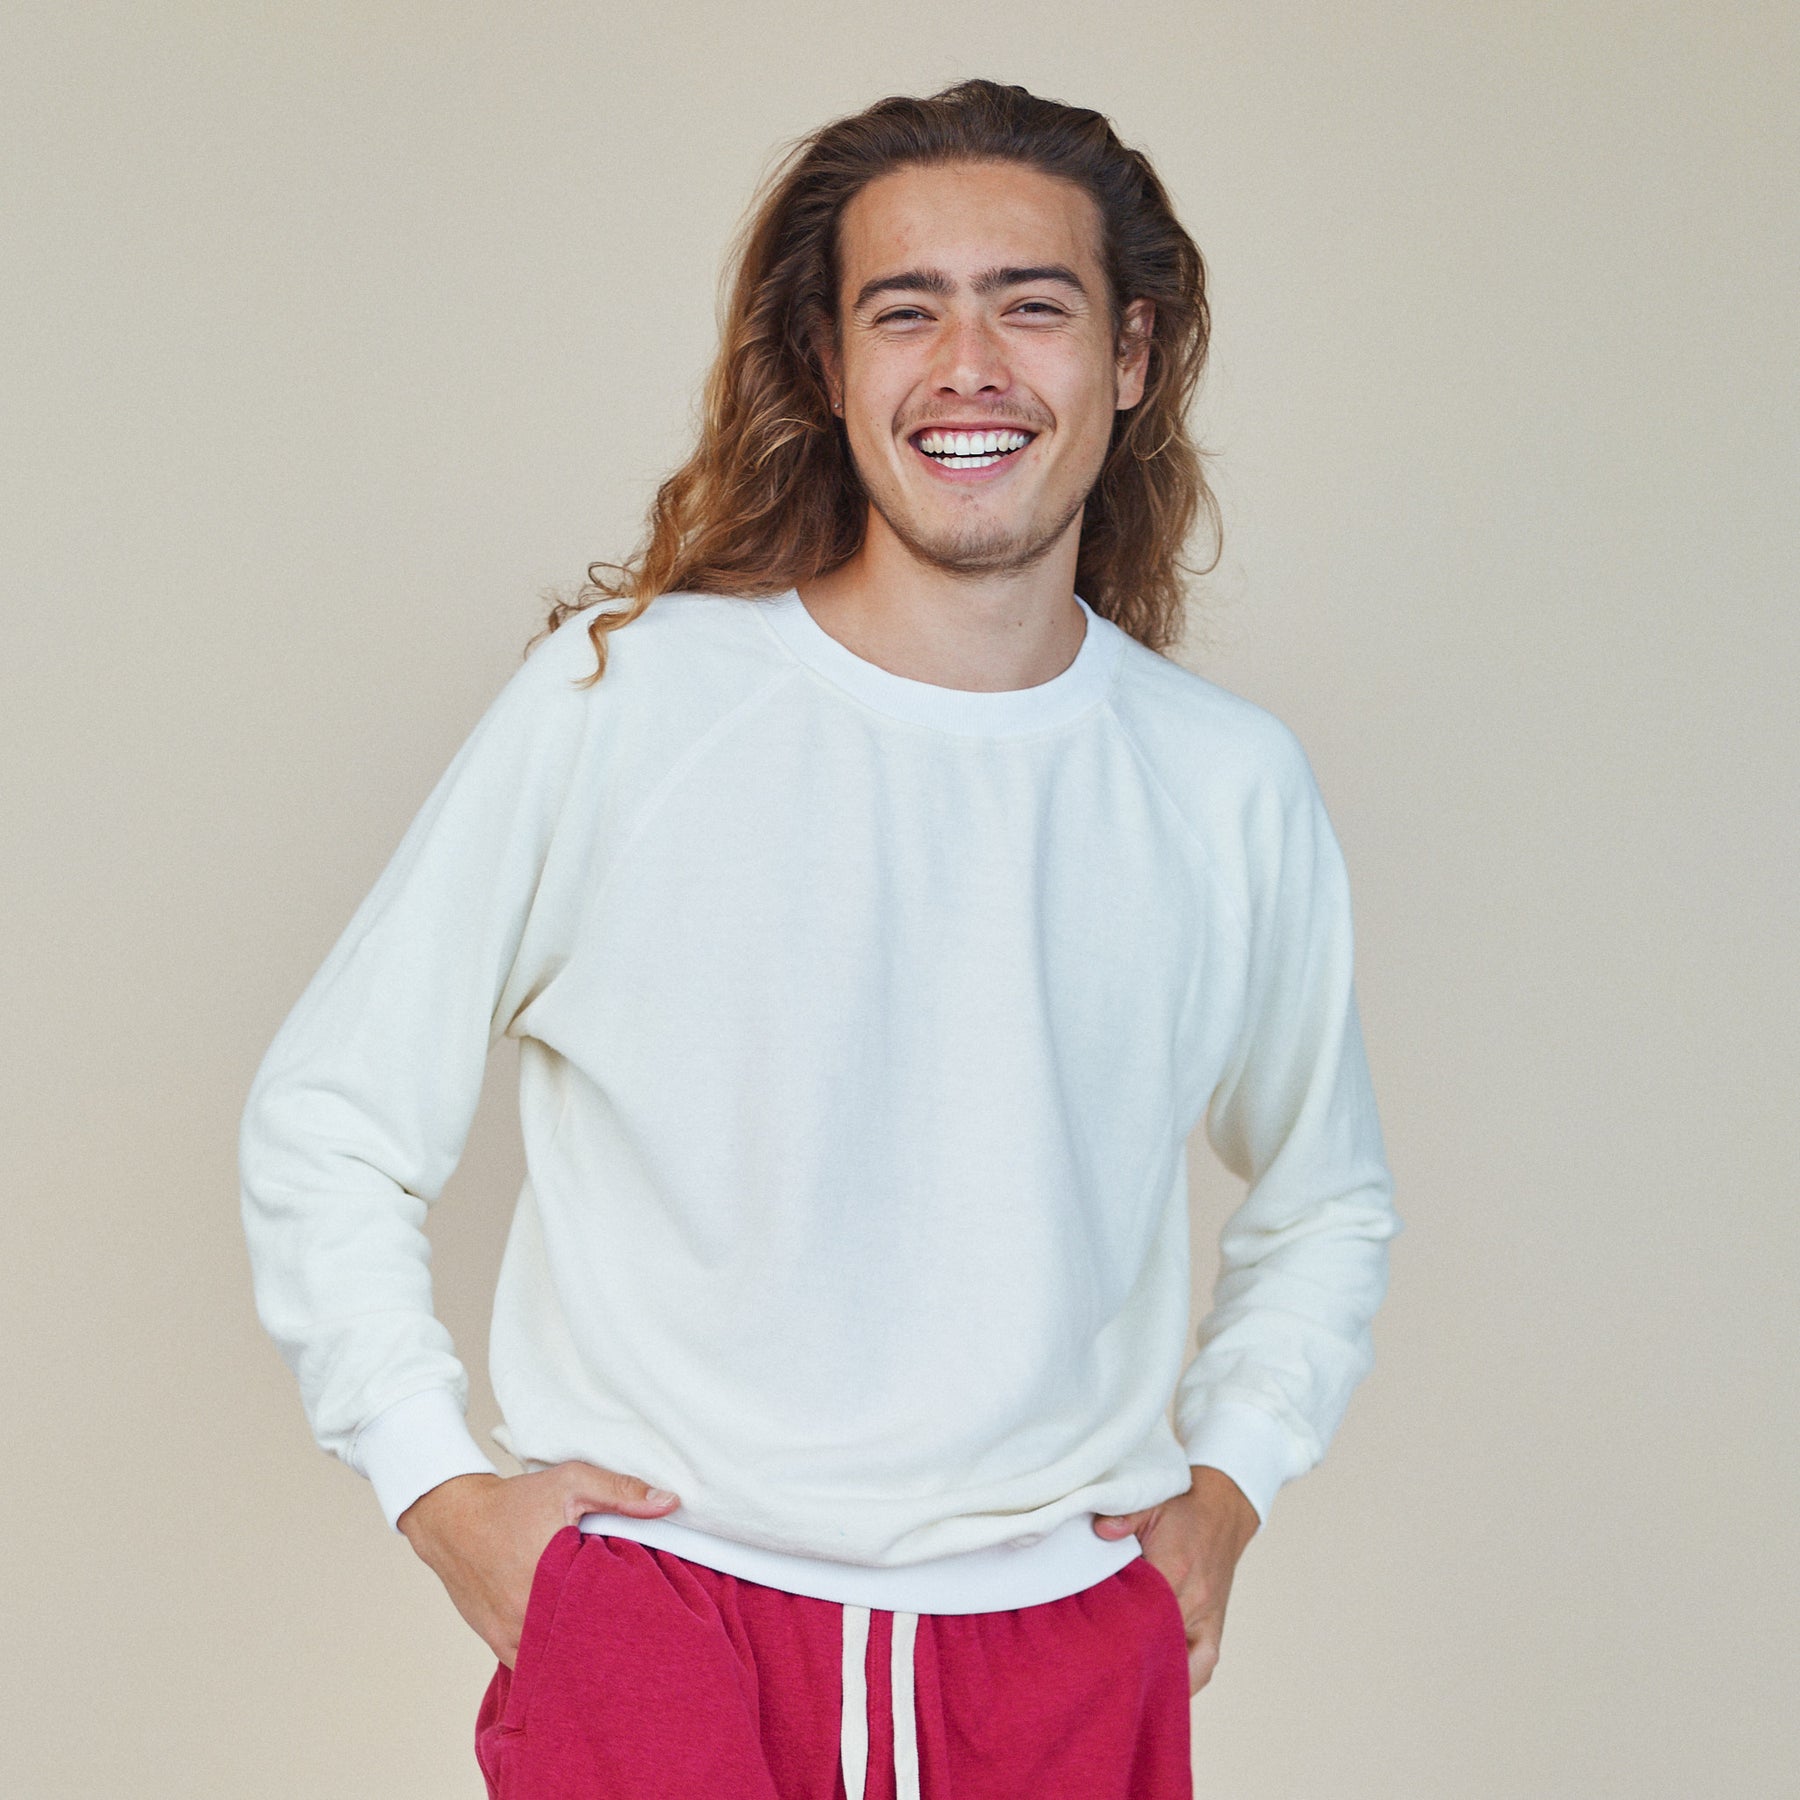 Hemp and organic cotton blend bonfire raglan by Jungmaven. Made sustainably and made to last, layer up for winter or wear to your neighborhood beach bonfire in this cozy sweatshirt.